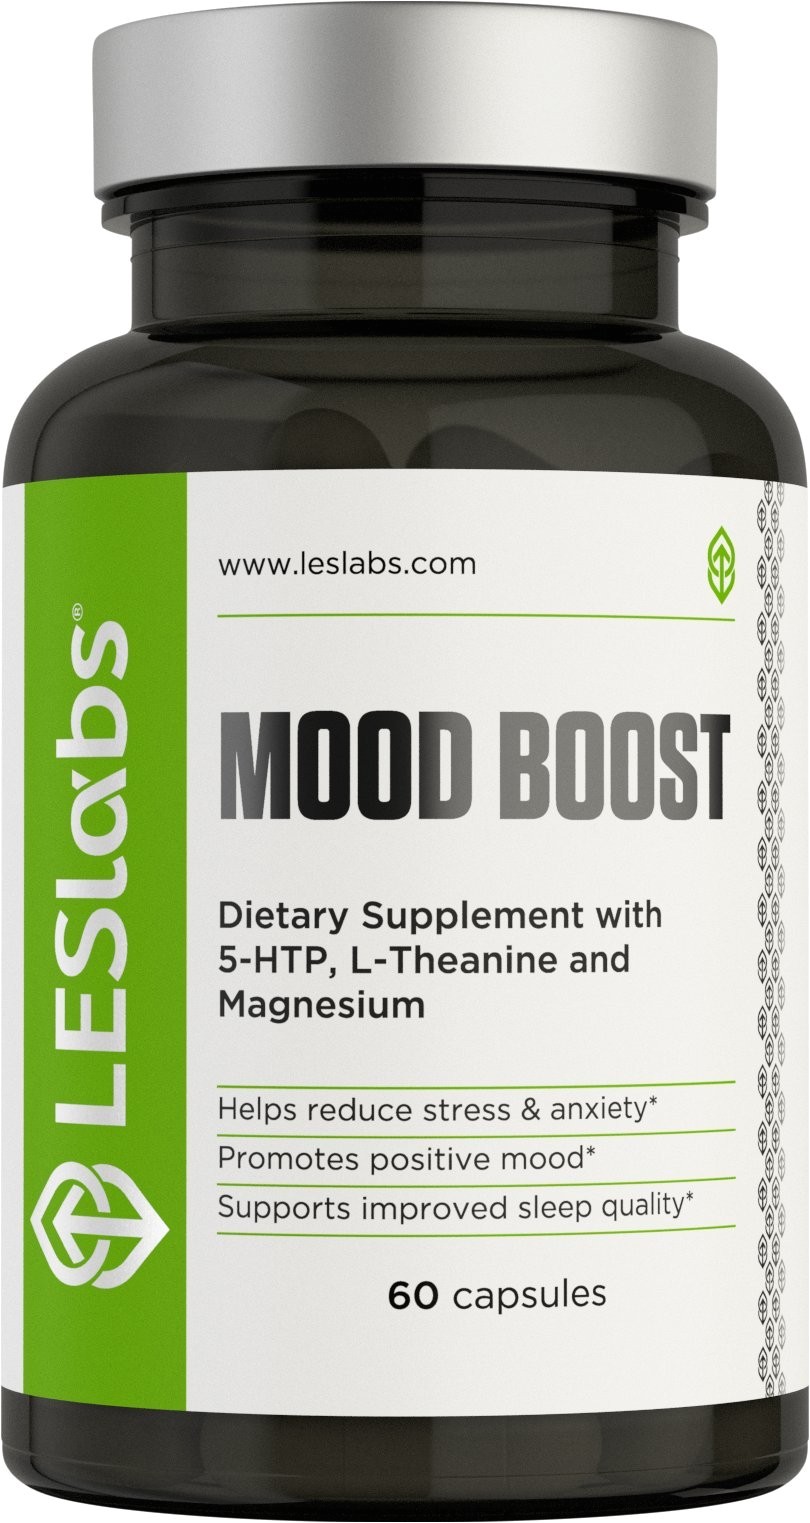 les labs mood boost natural supplement for stress and anxiety relief positive mood